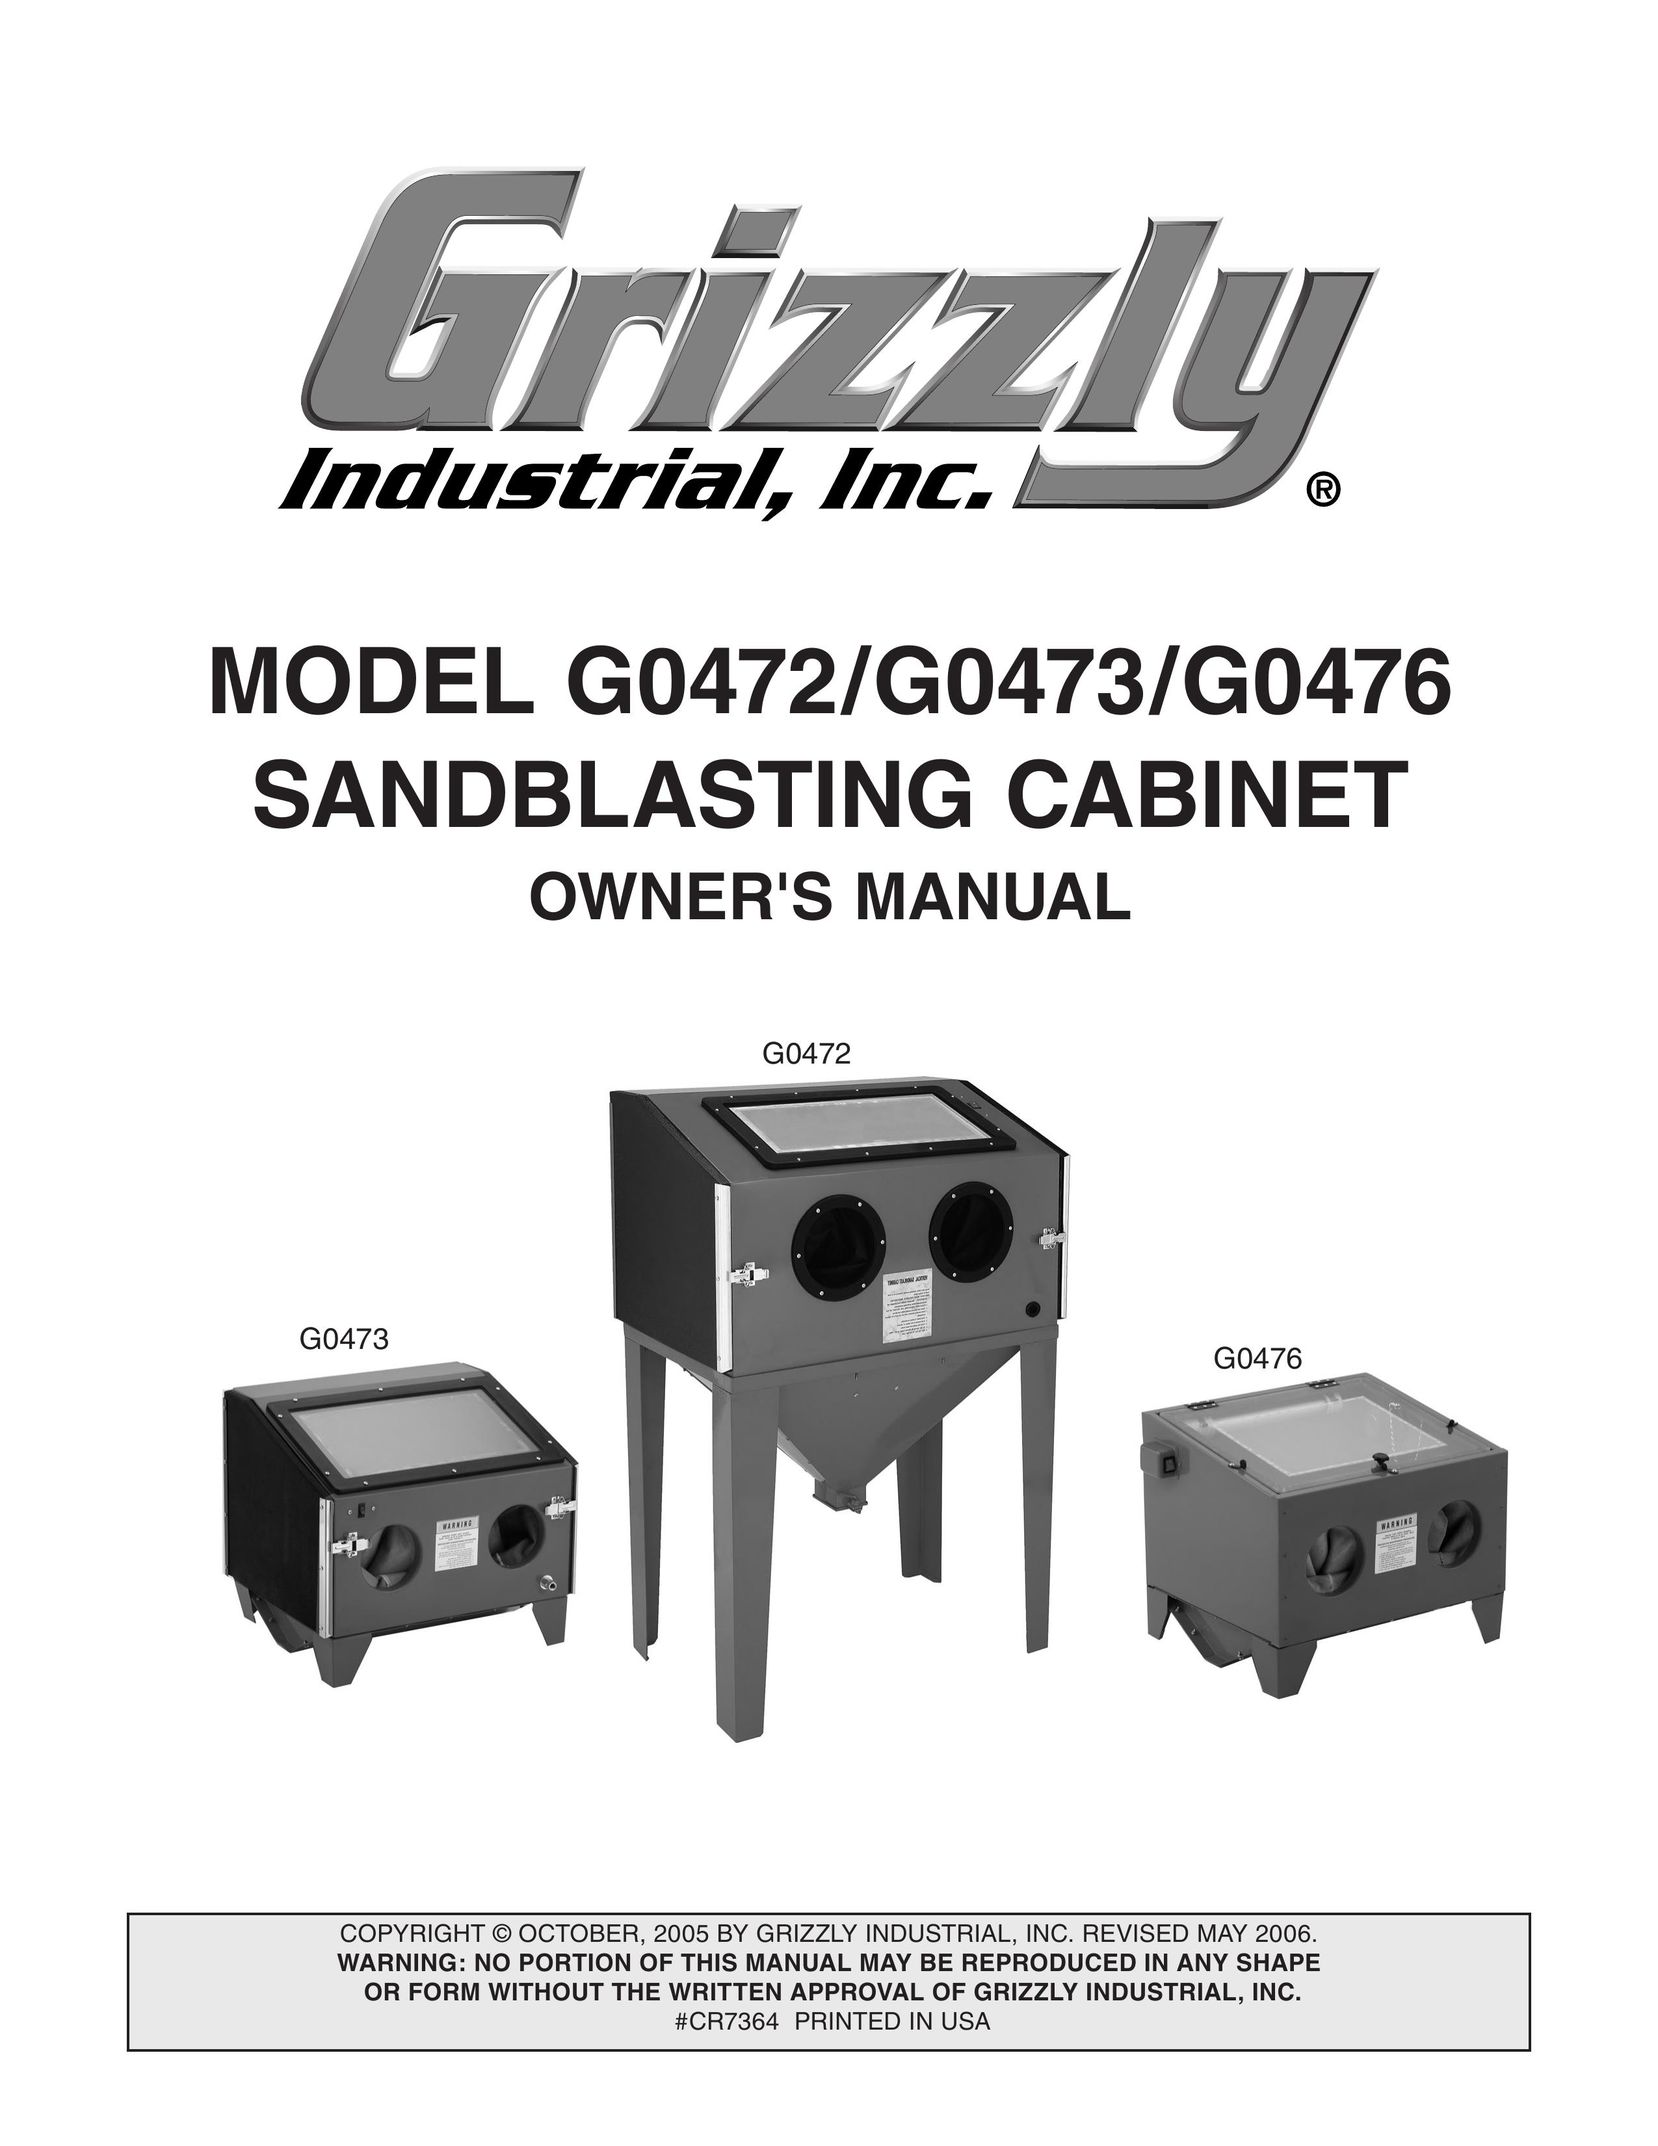 Grizzly G0473 Sander User Manual